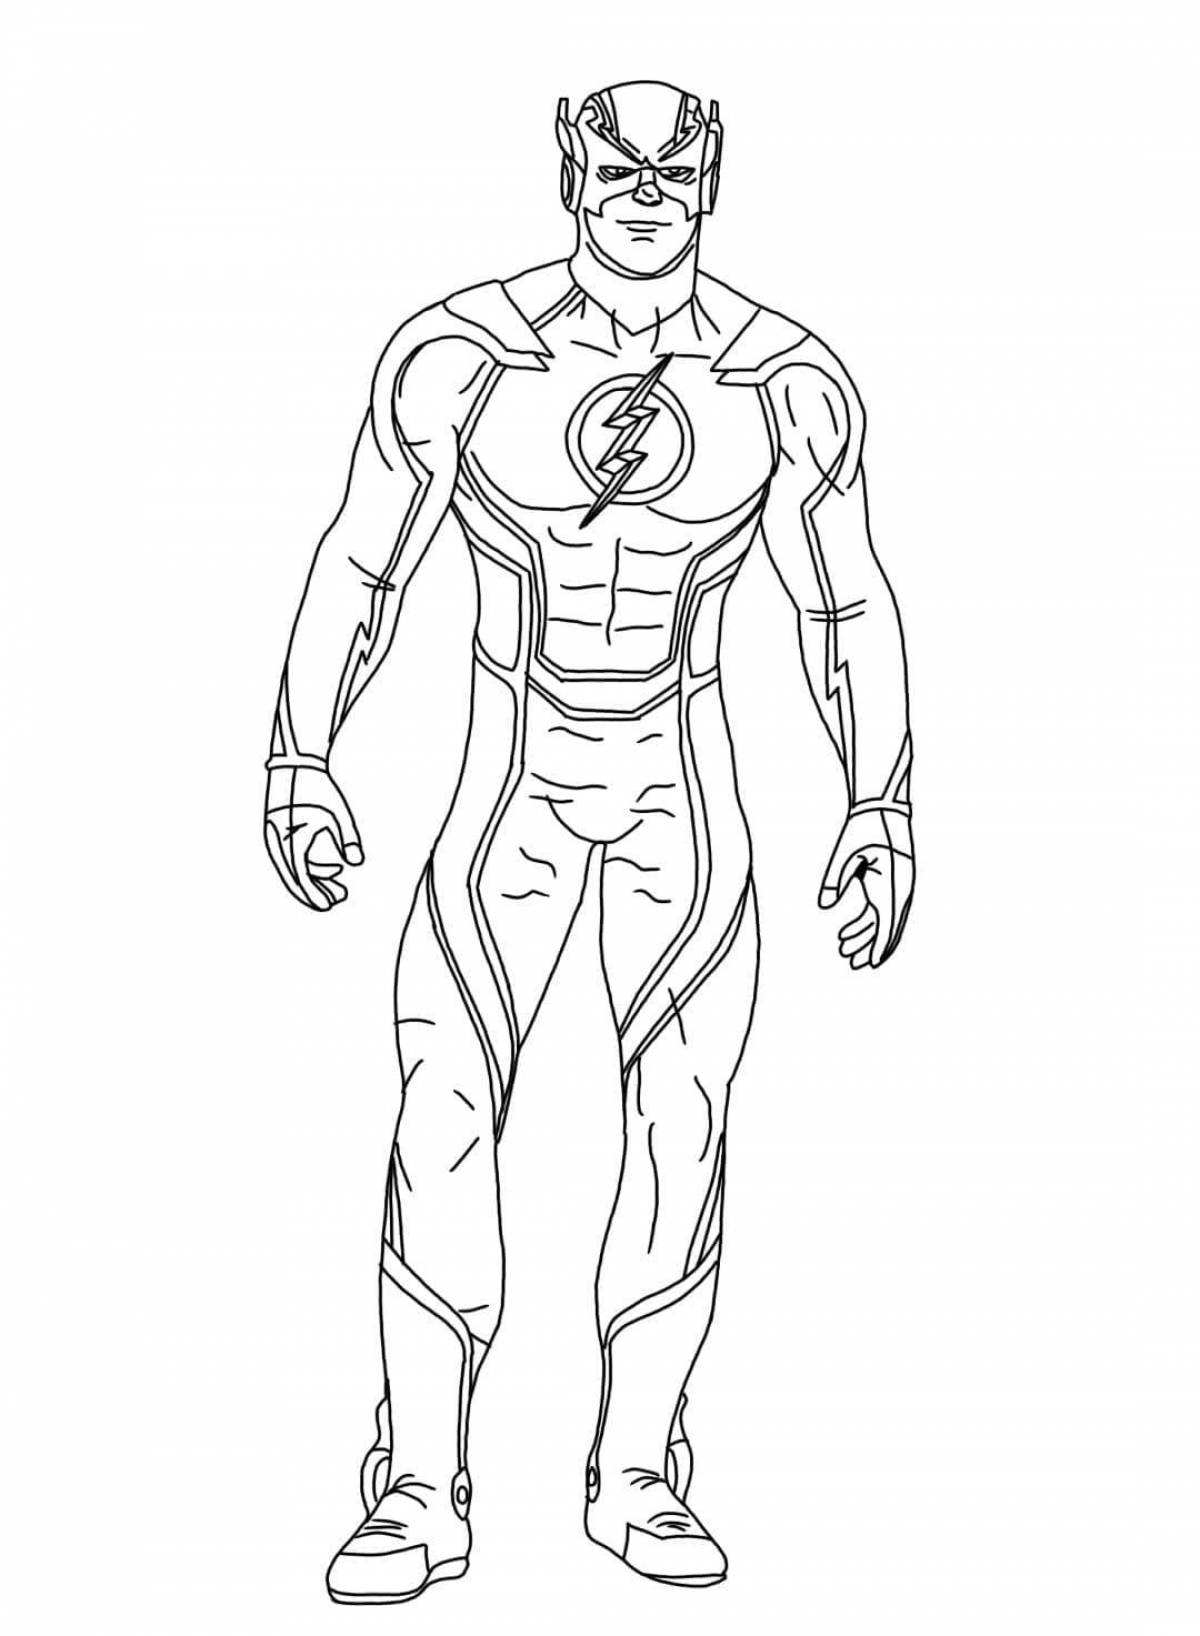 Fun superhero coloring pages for boys